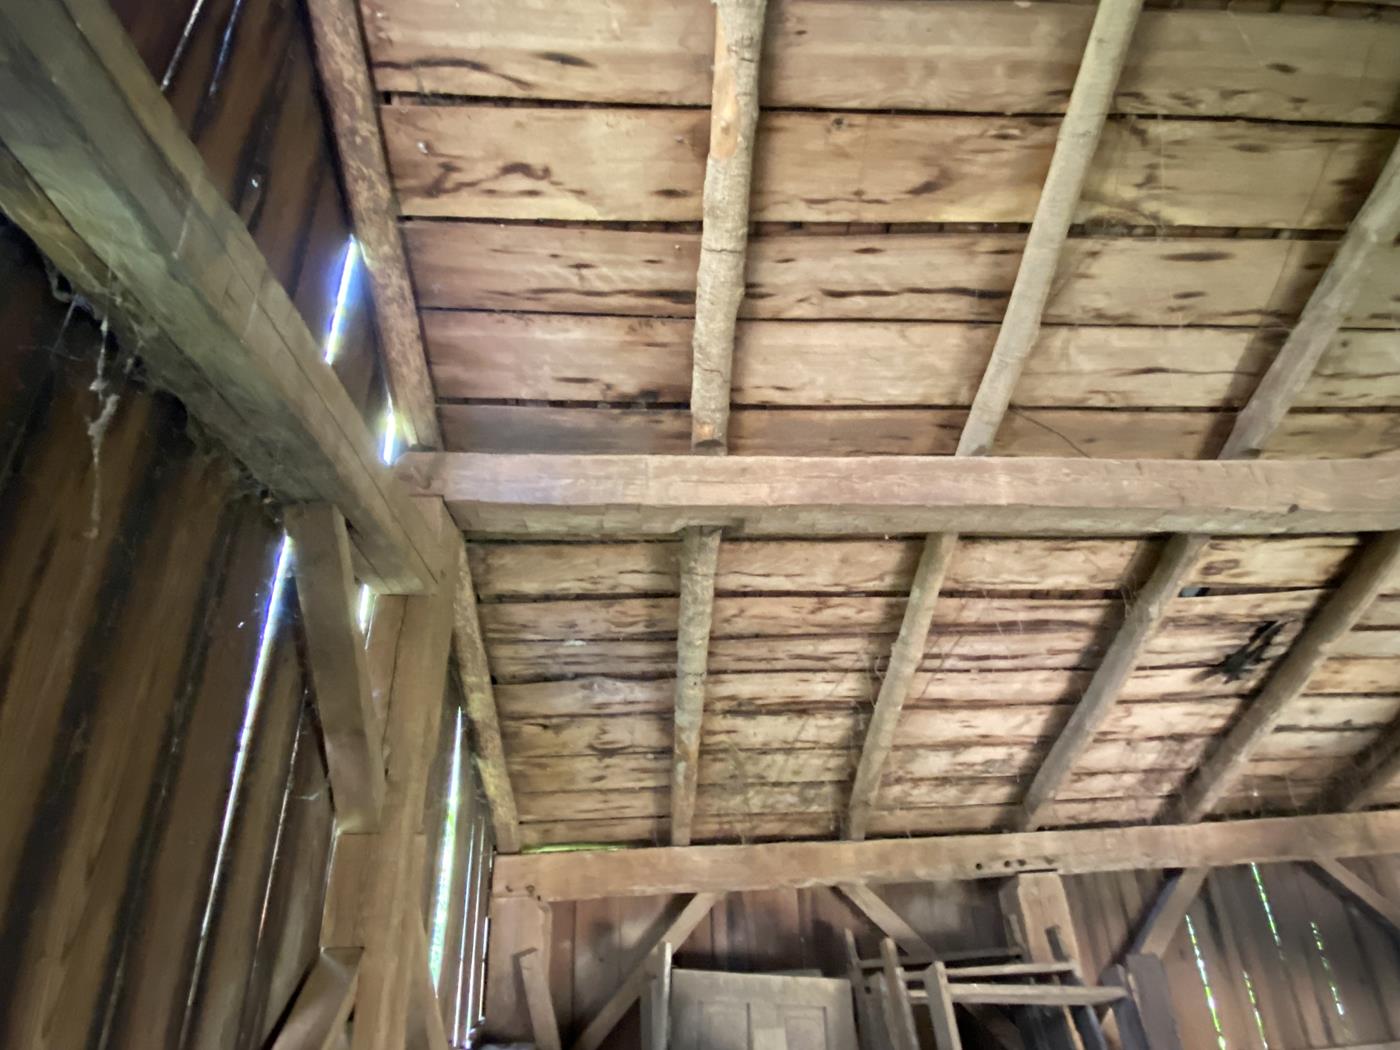 https://www.ohiovalleybarnsalvage.com/images/Historic Scott Salvaged Barn Frame - Your Source For White Oak Hand-Hewn Timbers